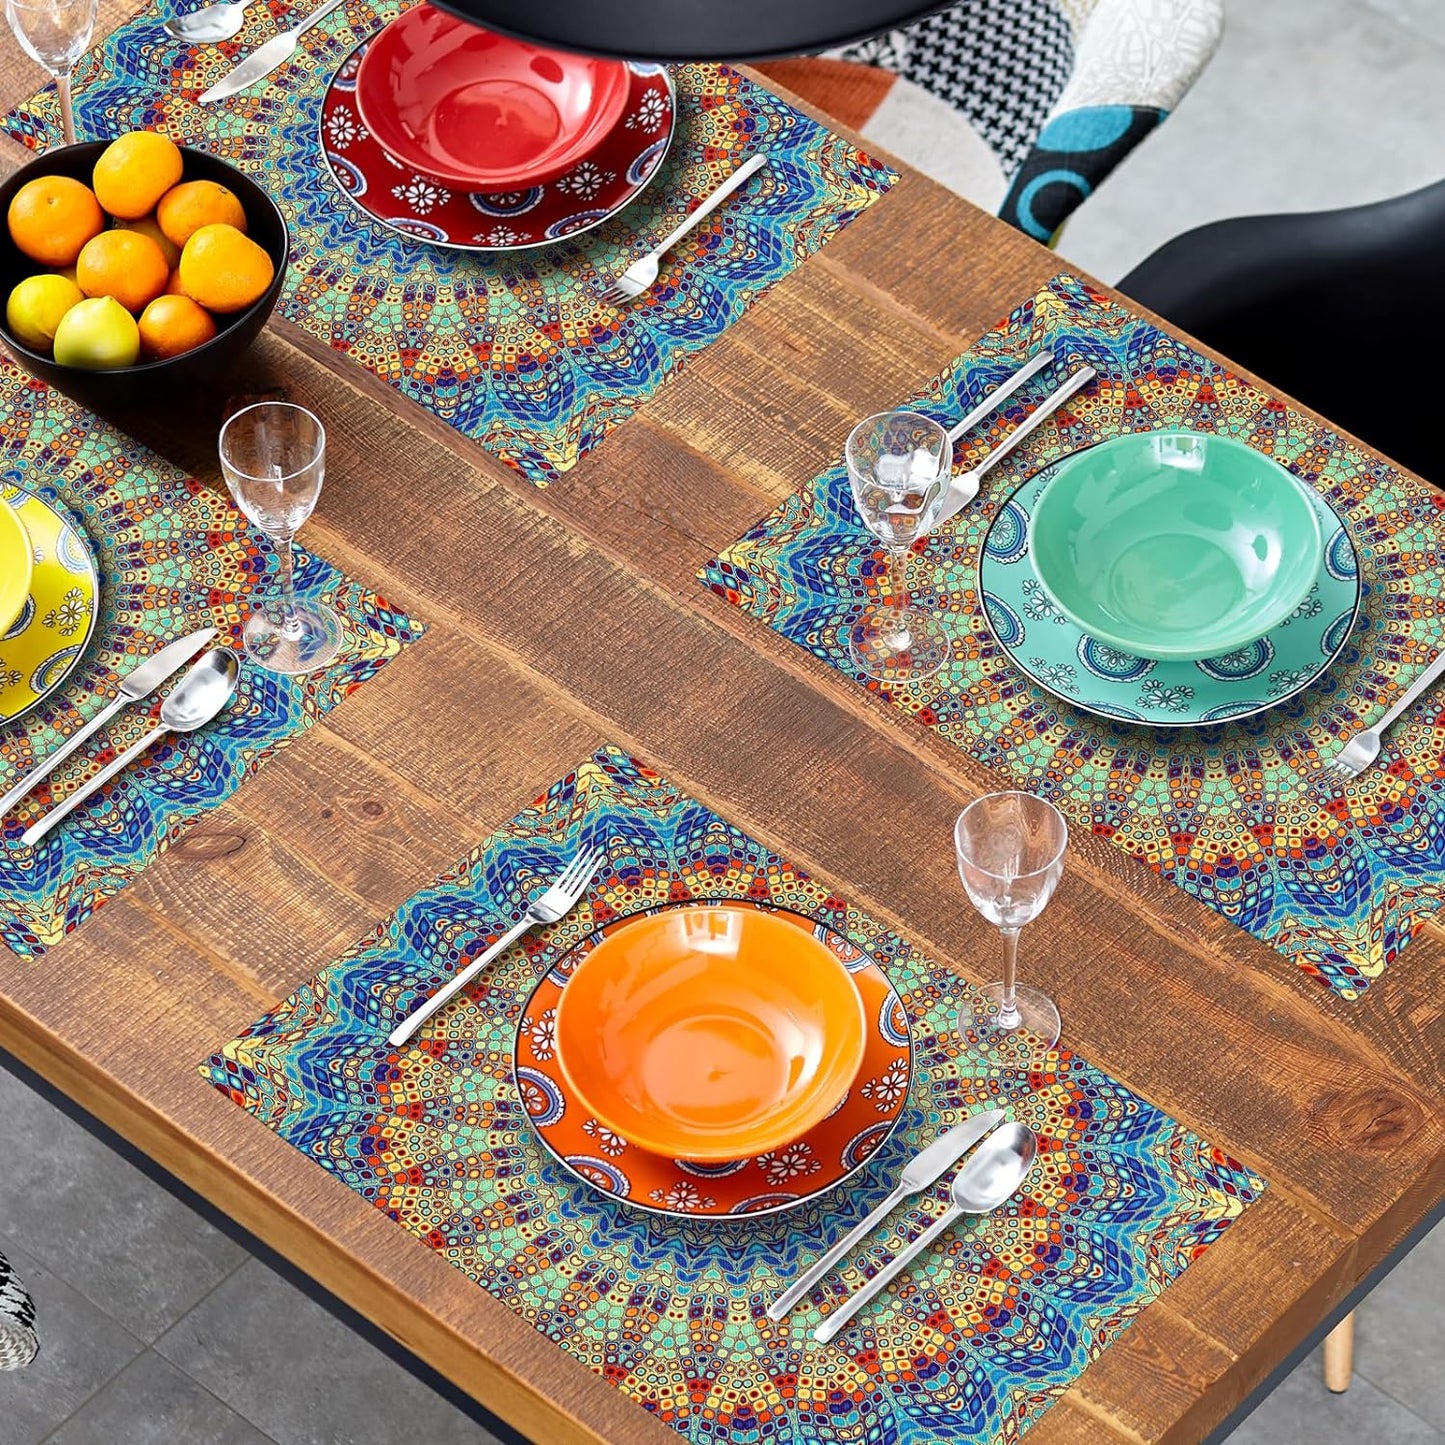 Knicewhome Boho Mandala Placemats Set of 4, Colorful Boho Table Mats 12 X 18 Inch Bohemian Table Placemats Non-Slip Heat Resistant Place Mats for Dining Kitchen Table Party Coffee Bar Accessories